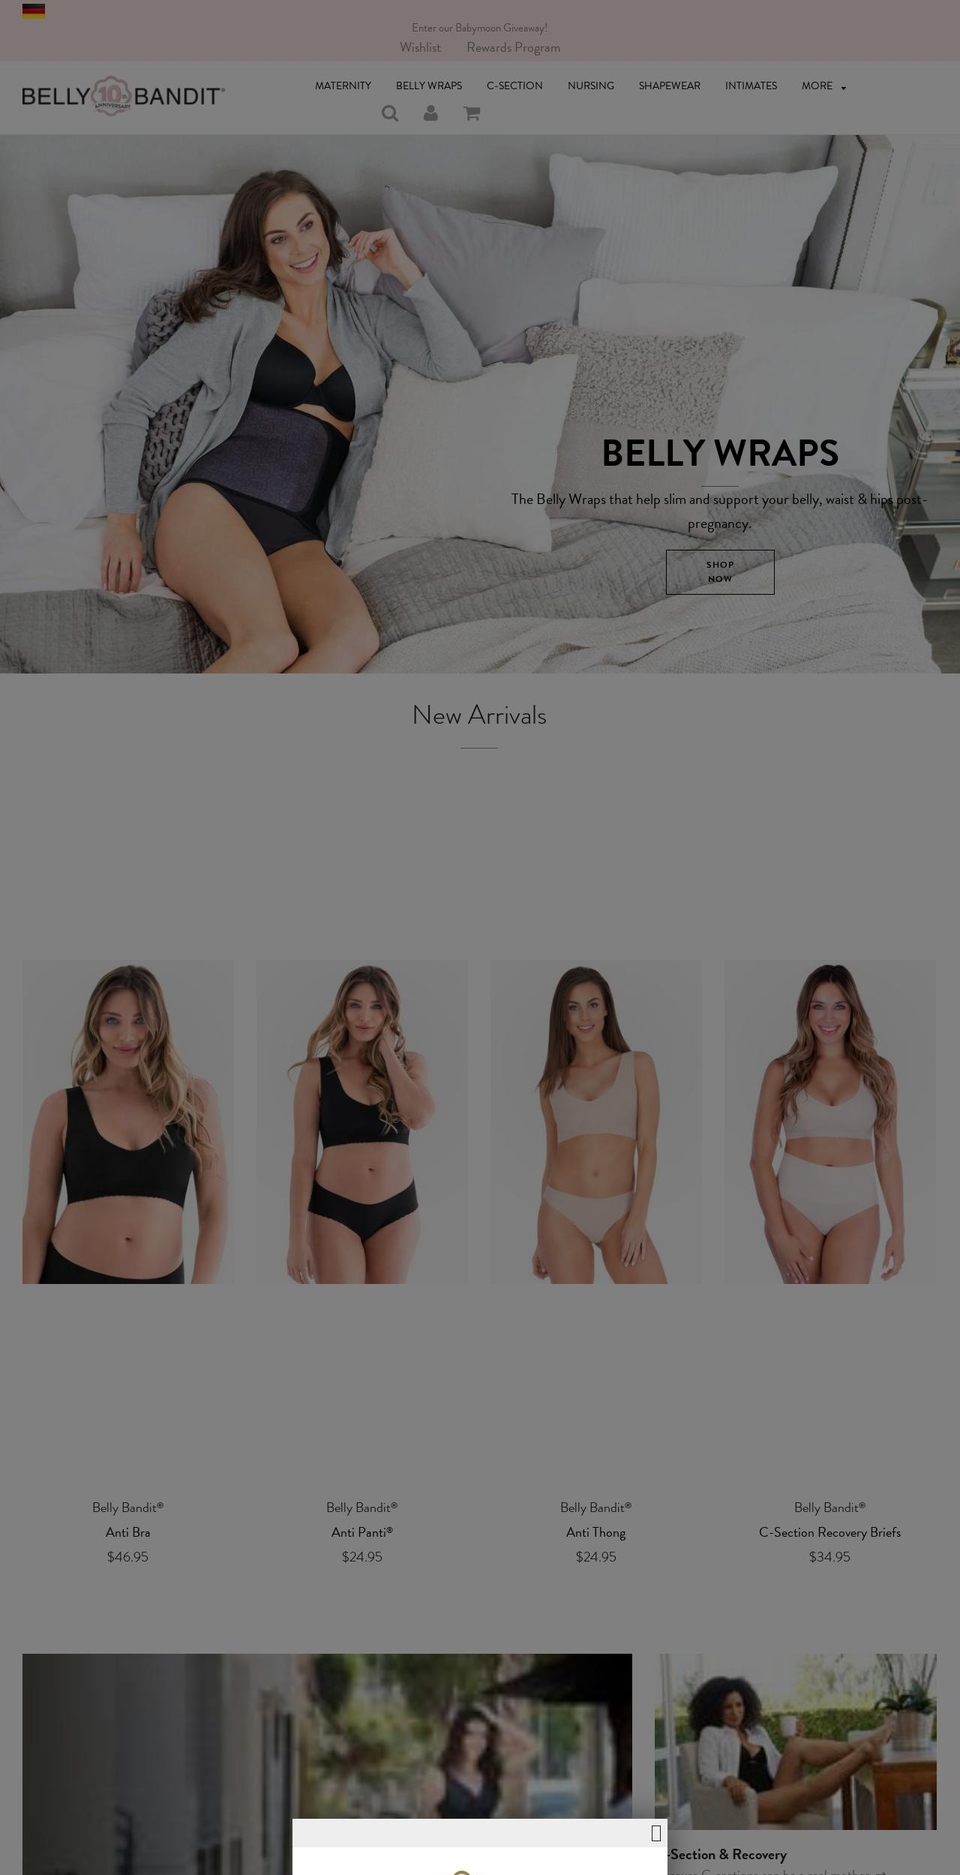 Copy of Flow Shopify theme site example bellybandit.us